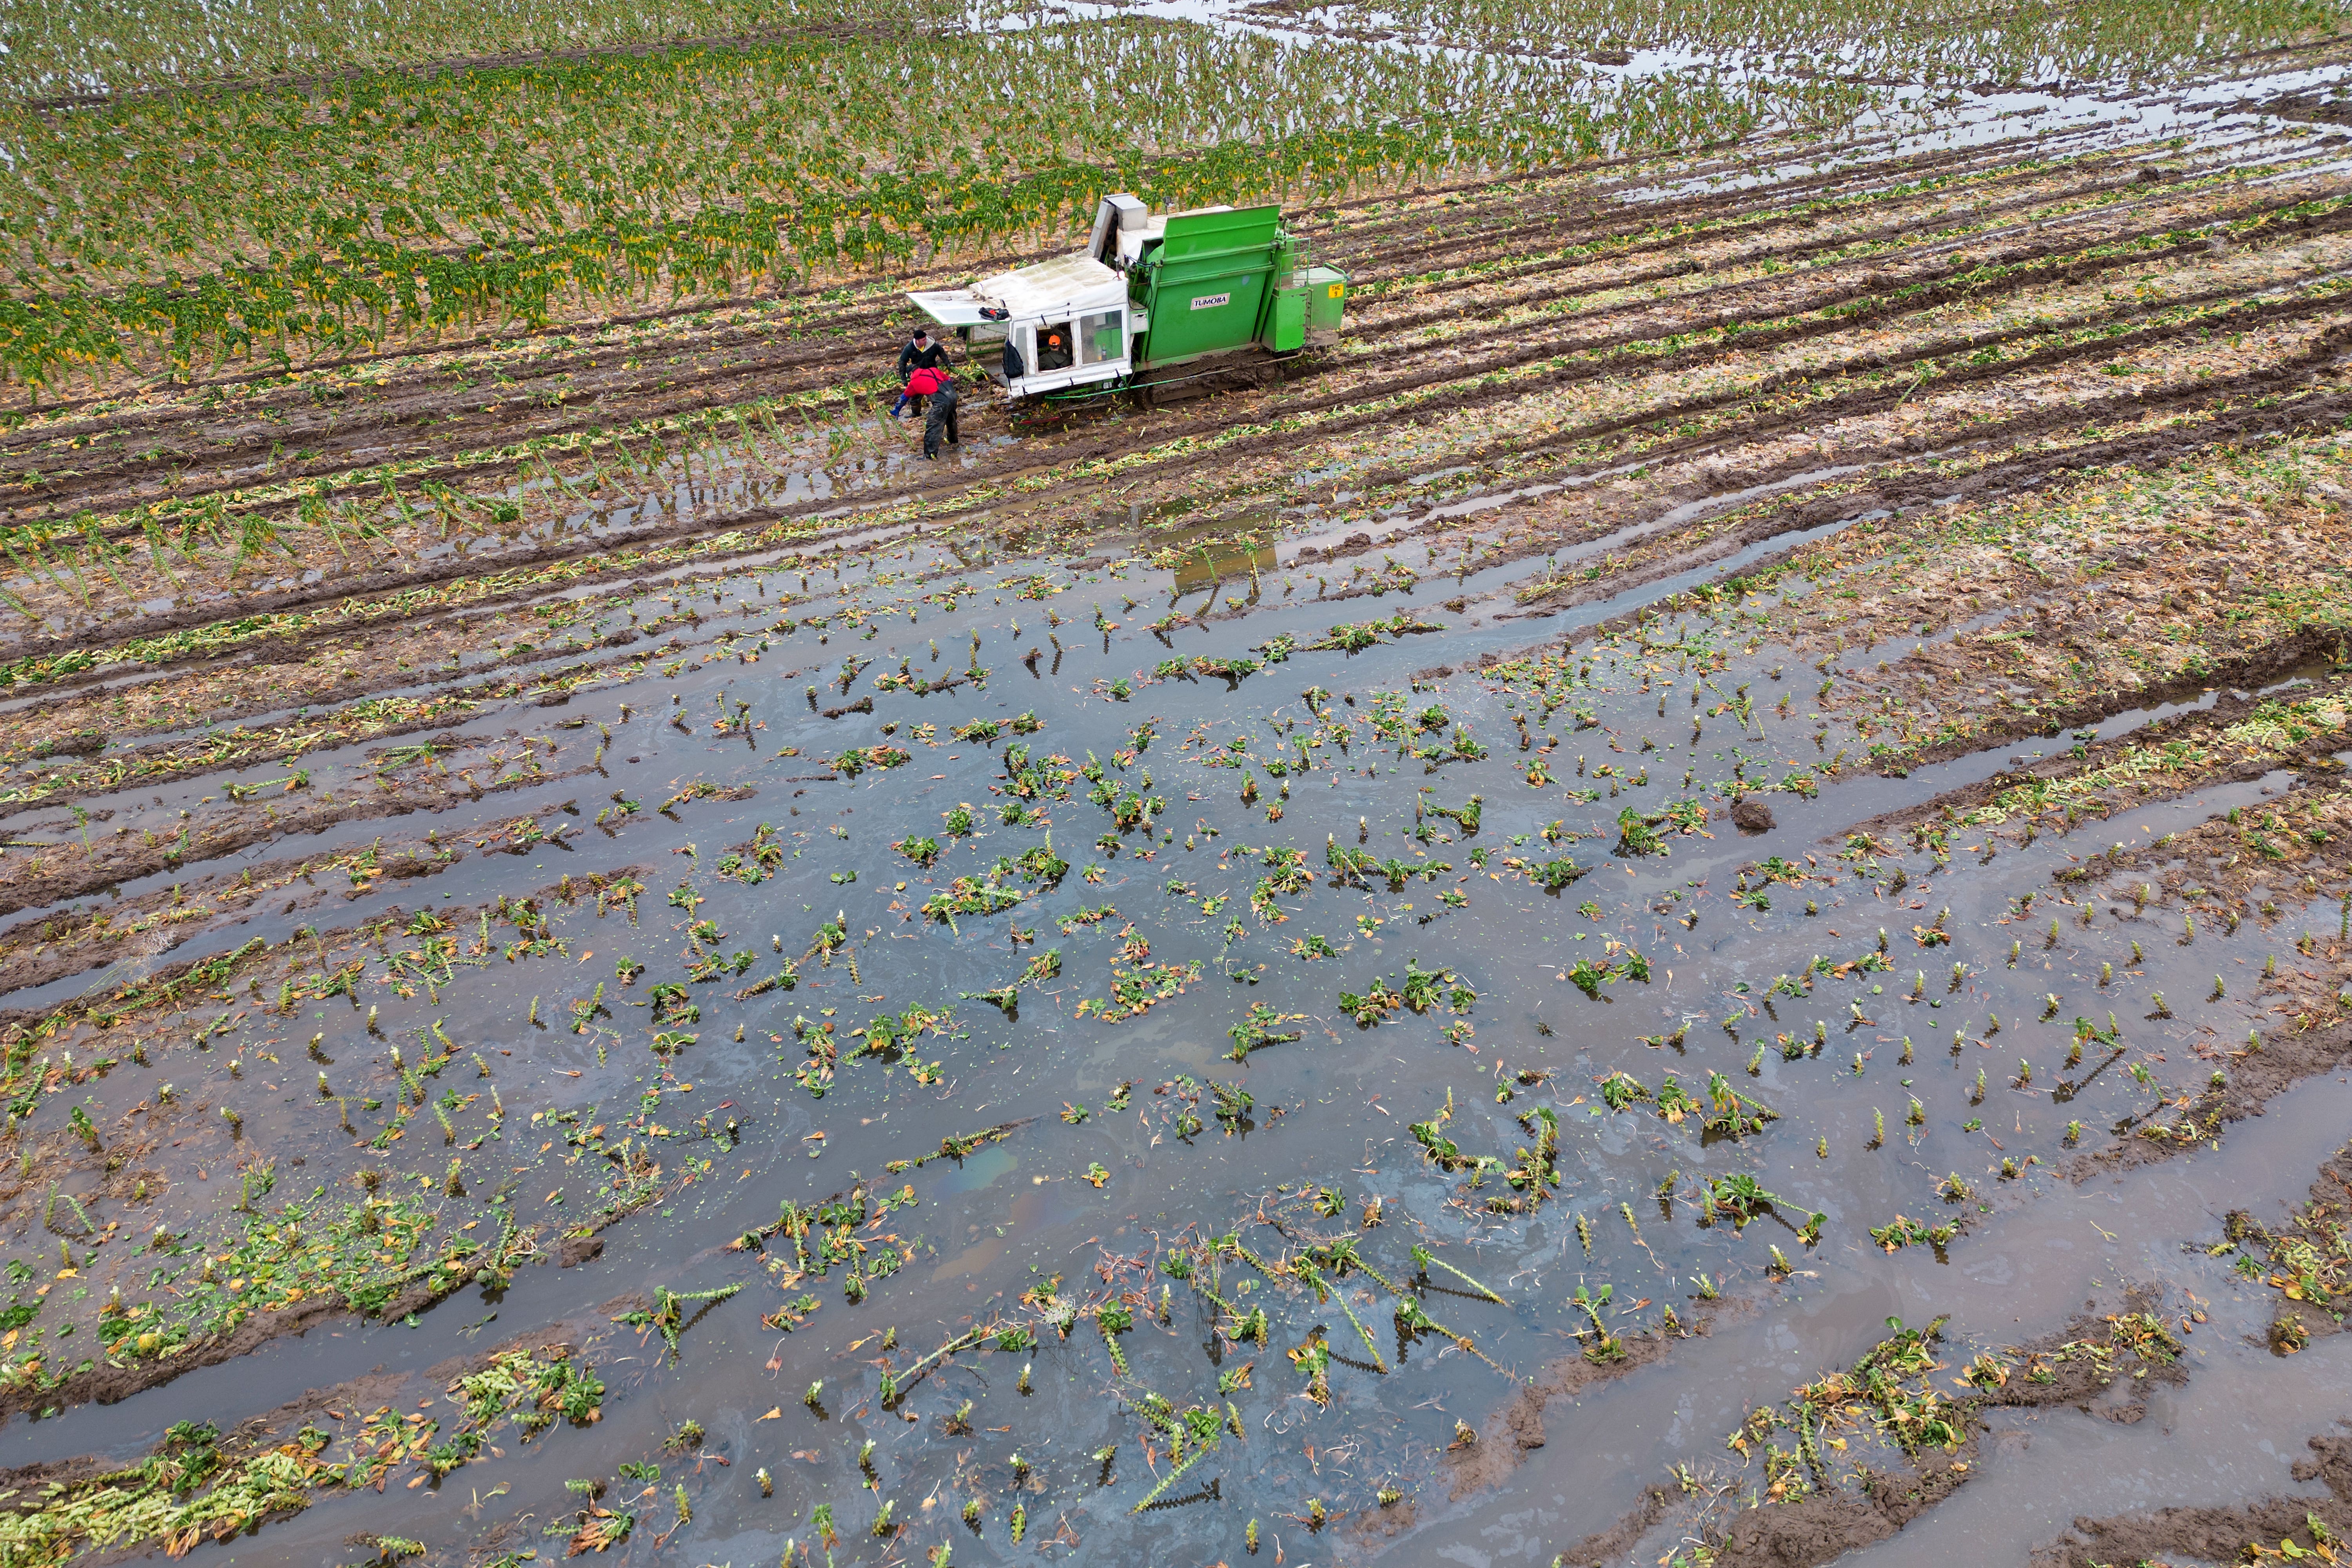 Brussels sprouts are harvested in a flooded field at TH Clements and Son Ltd near Boston, Lincolnshire. (Joe Giddens/ PA)